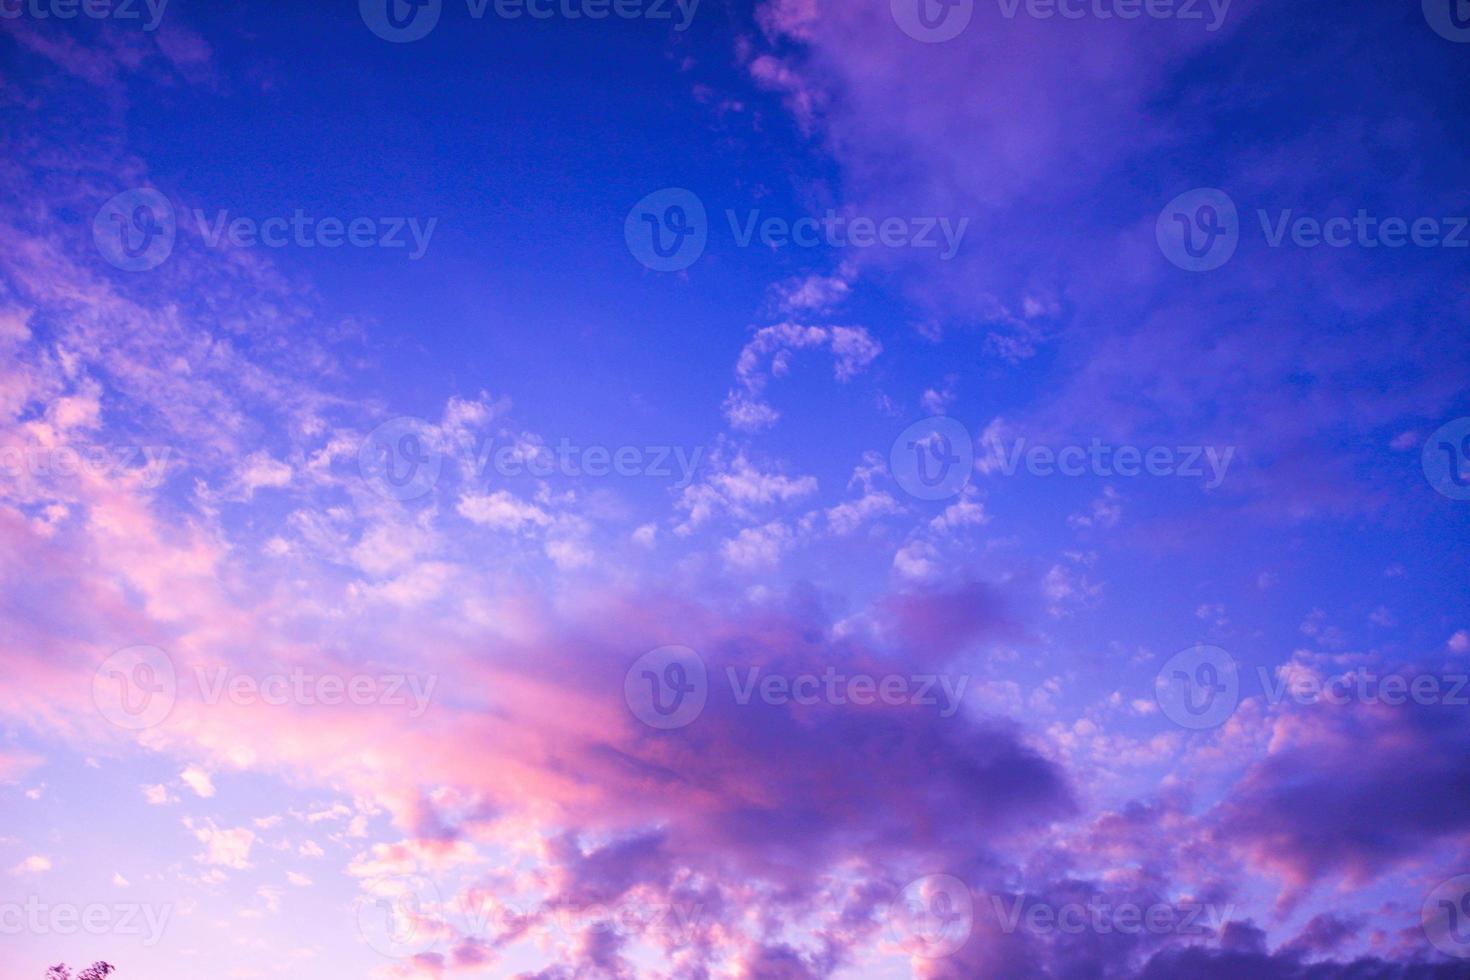 Orange and blue sky, Colorful cloudy sky at sunset. Gradient color. Sky texture, abstract nature background photo